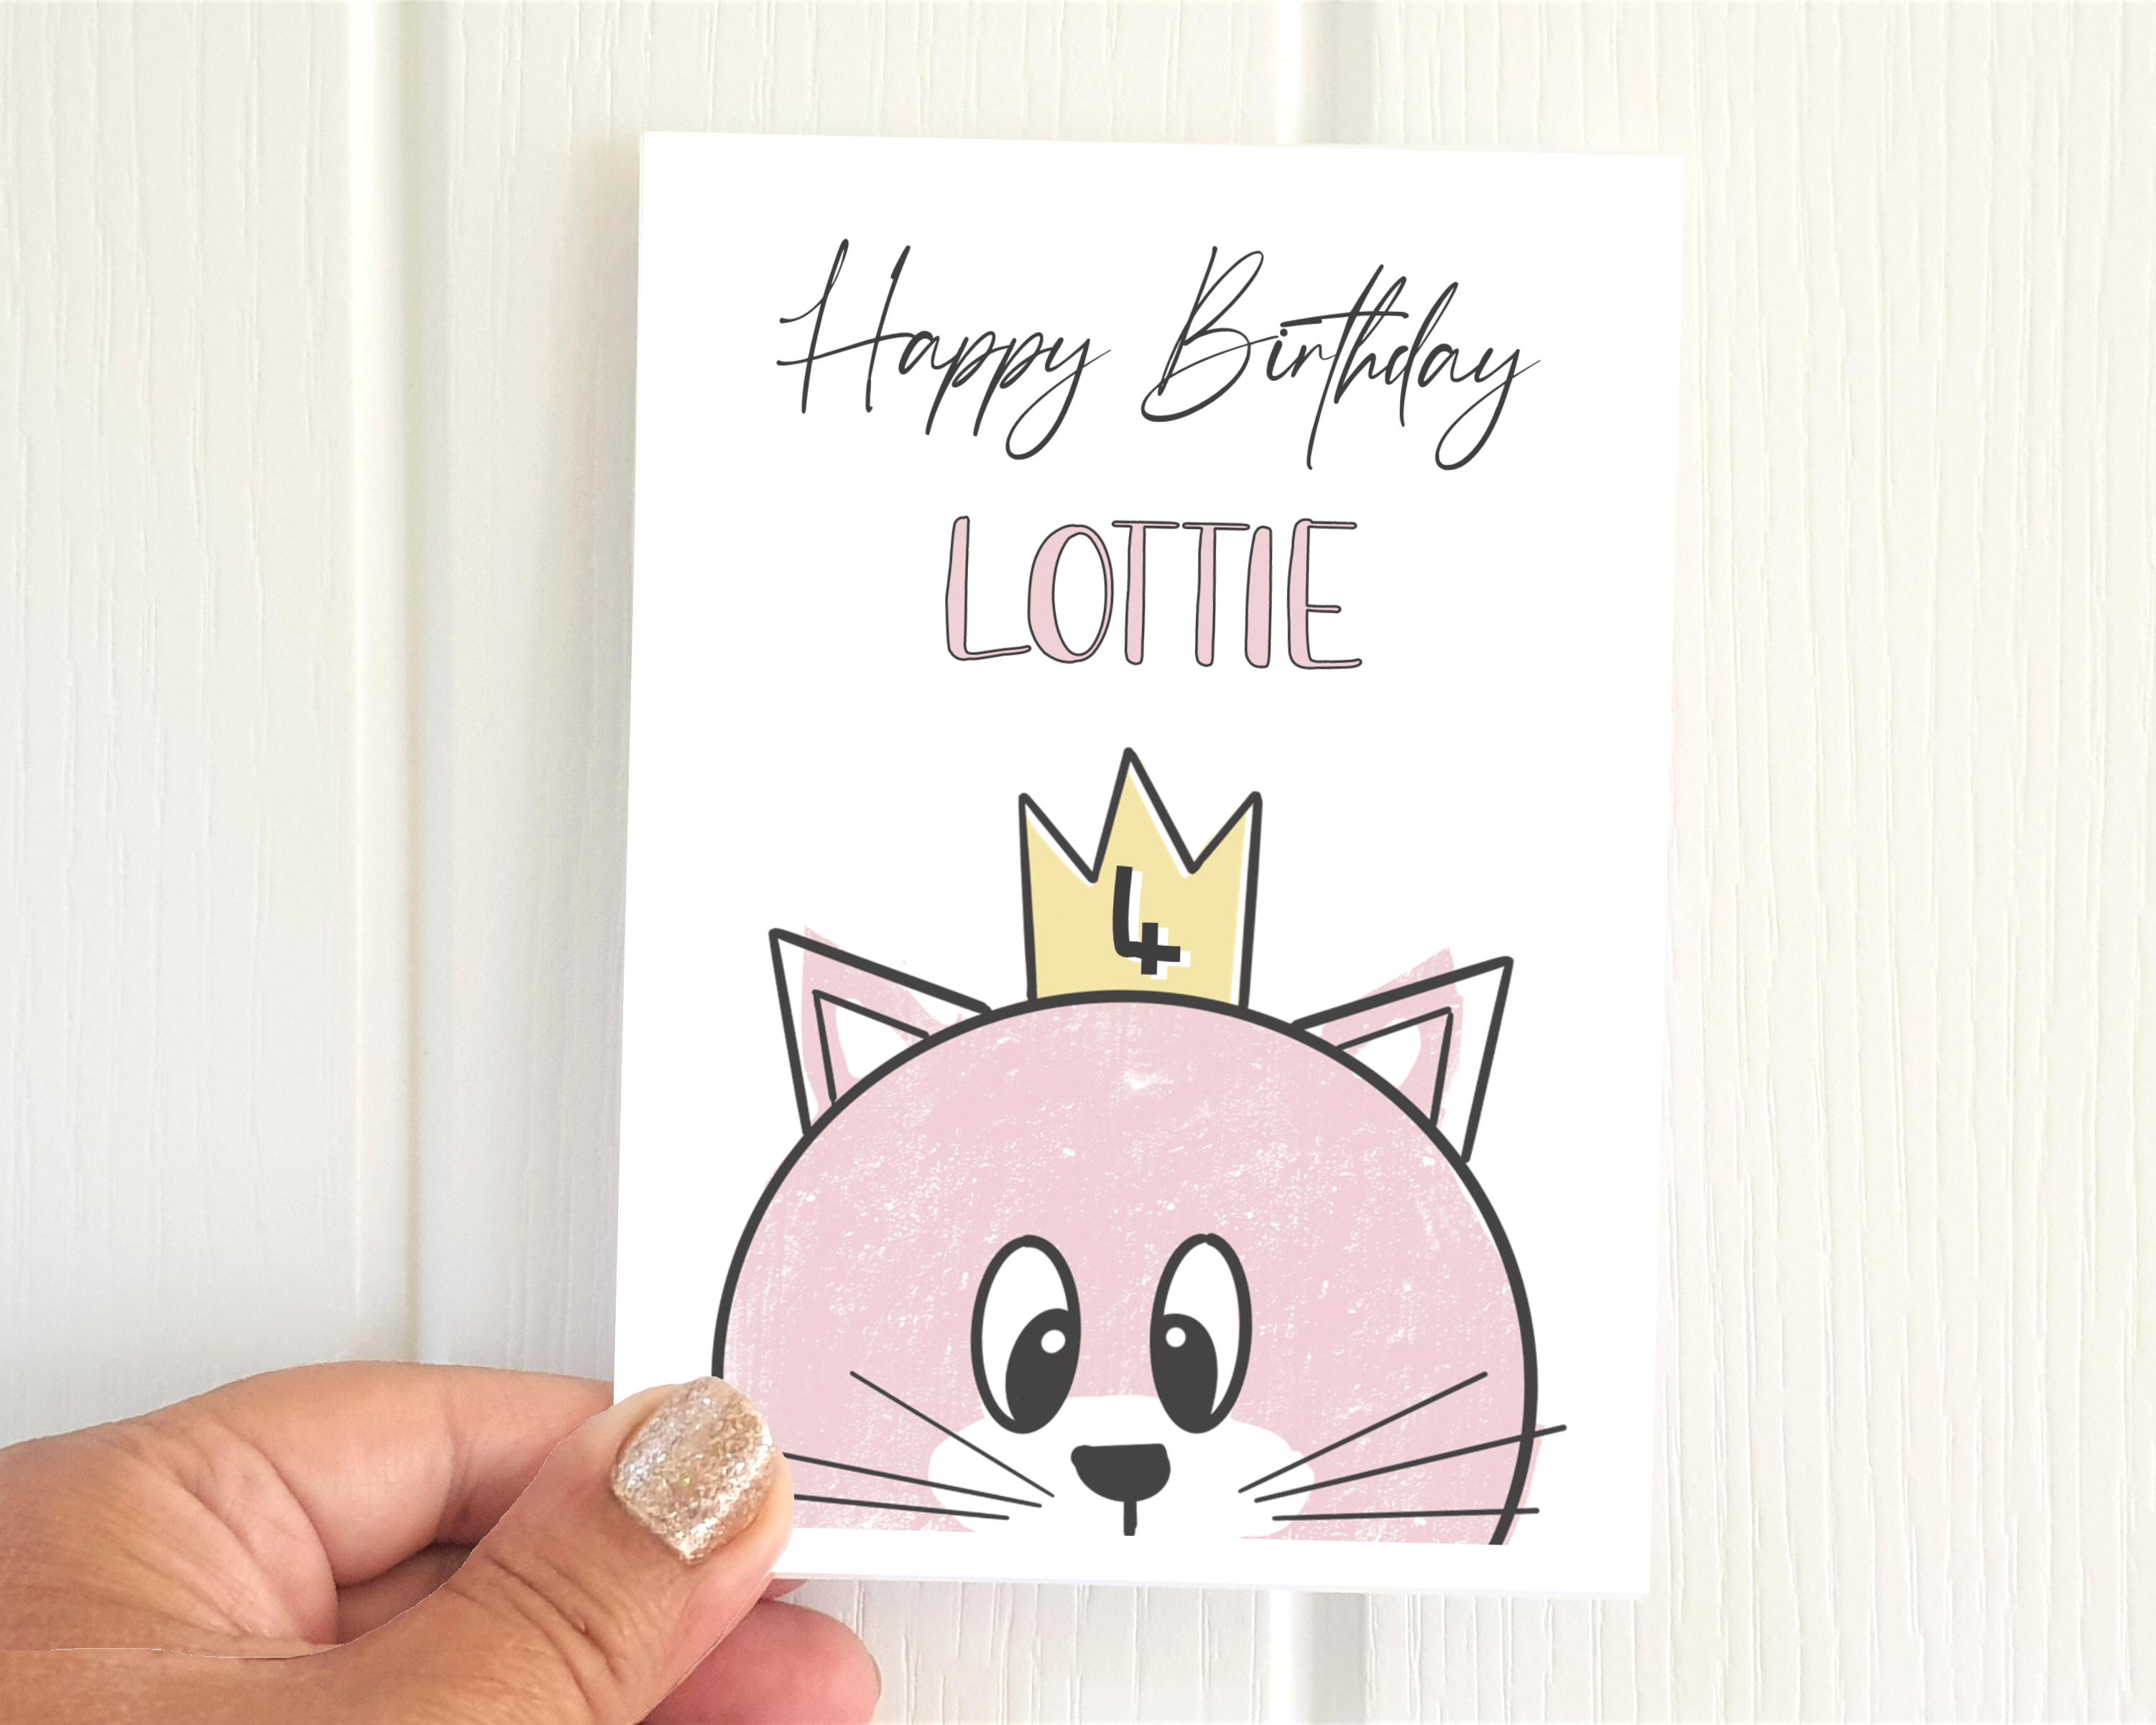 Poppleberry A6 folded birthday card, with a personalised pink cat illustration, on white cardstock, size compared to thumb.